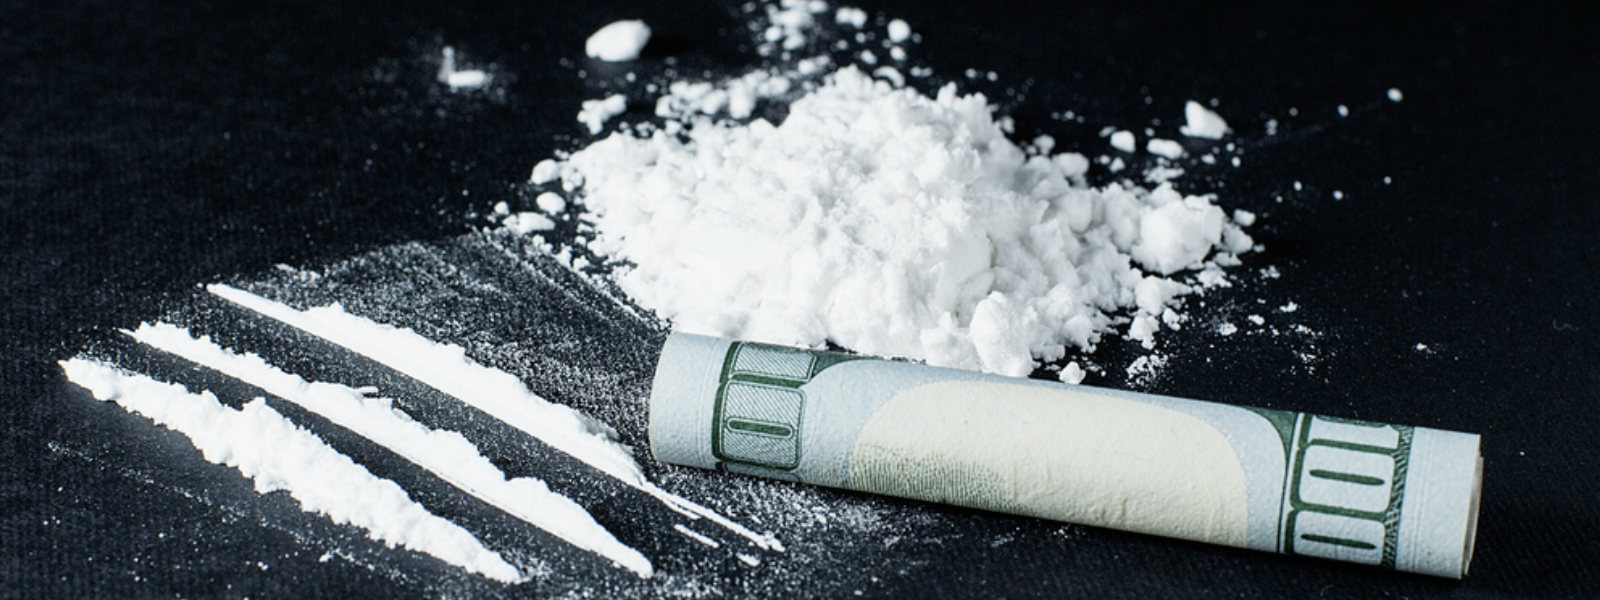 3 arrested with 32g of Cocaine in Mount Lavinia 